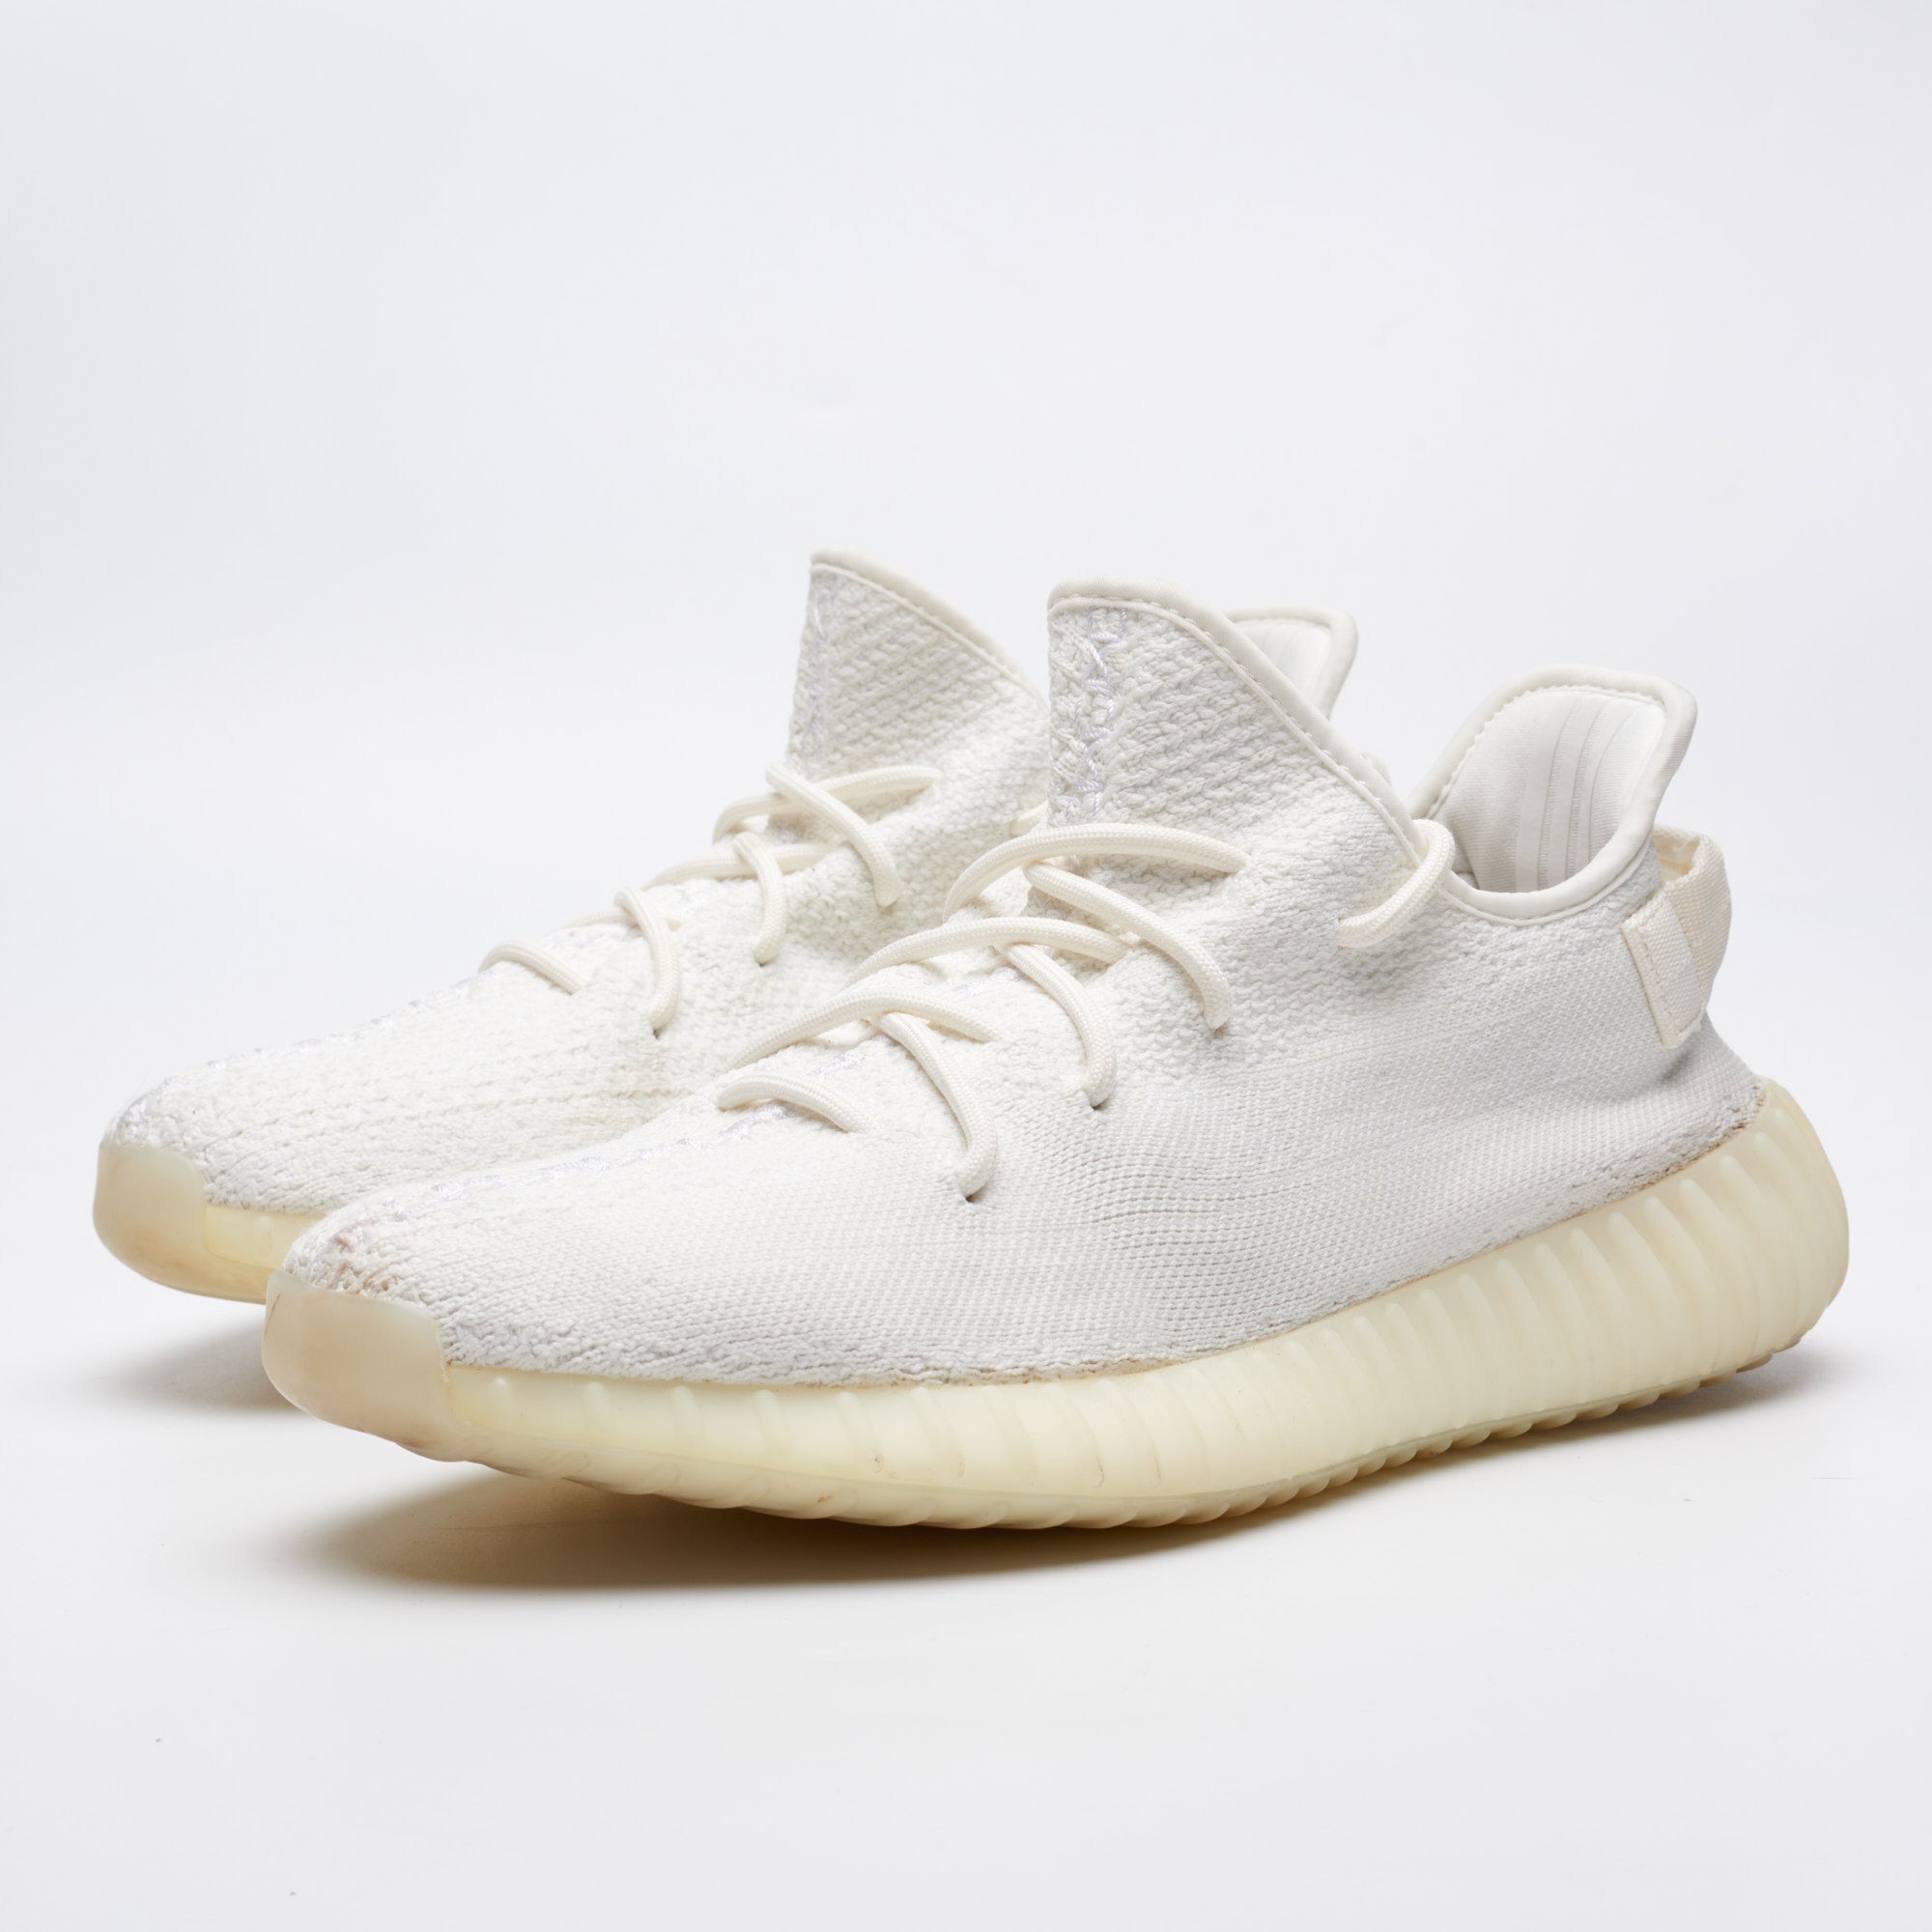 ADIDAS YEEZY BOOST 350 V2 Cream Triple White Sneakers Shoes UK 9.5 US 10